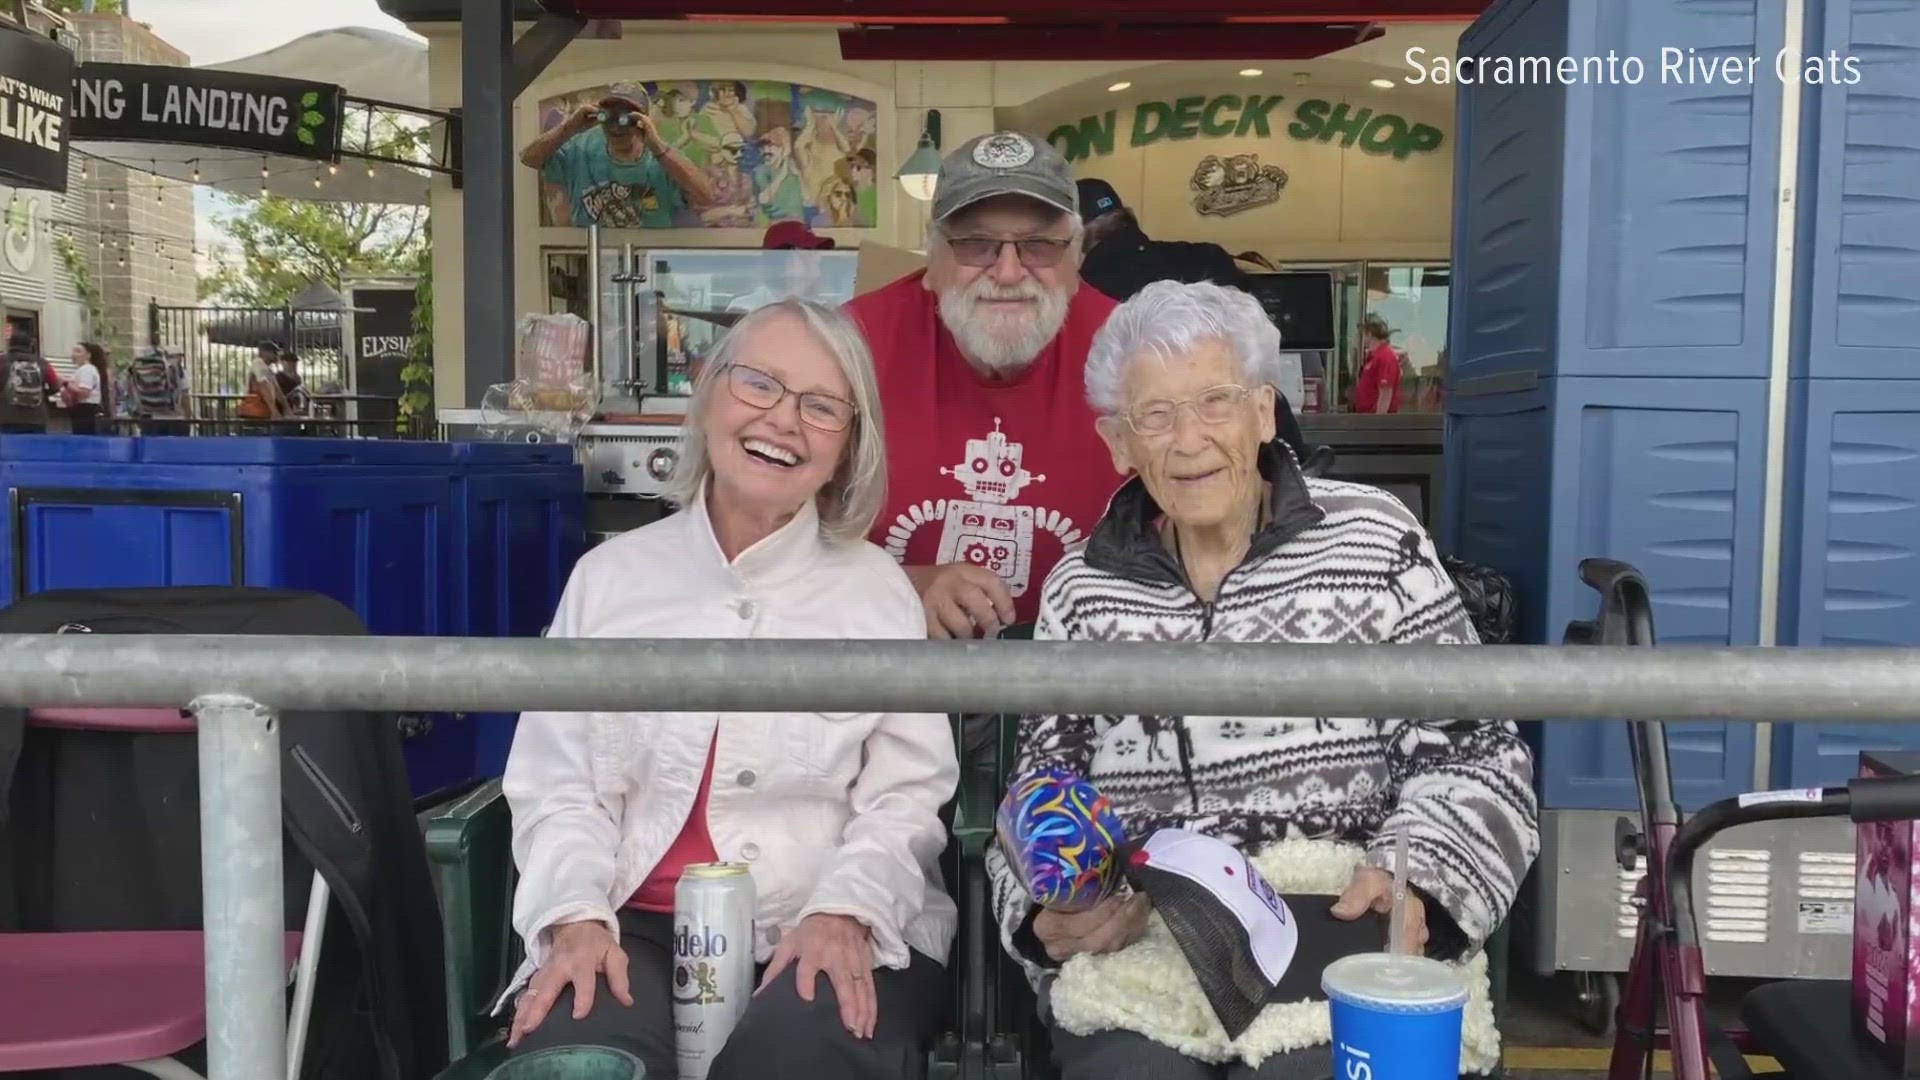 Dorothy Folena celebrated her birthday by watching the Rivercats win. She's been a fan her entire life.